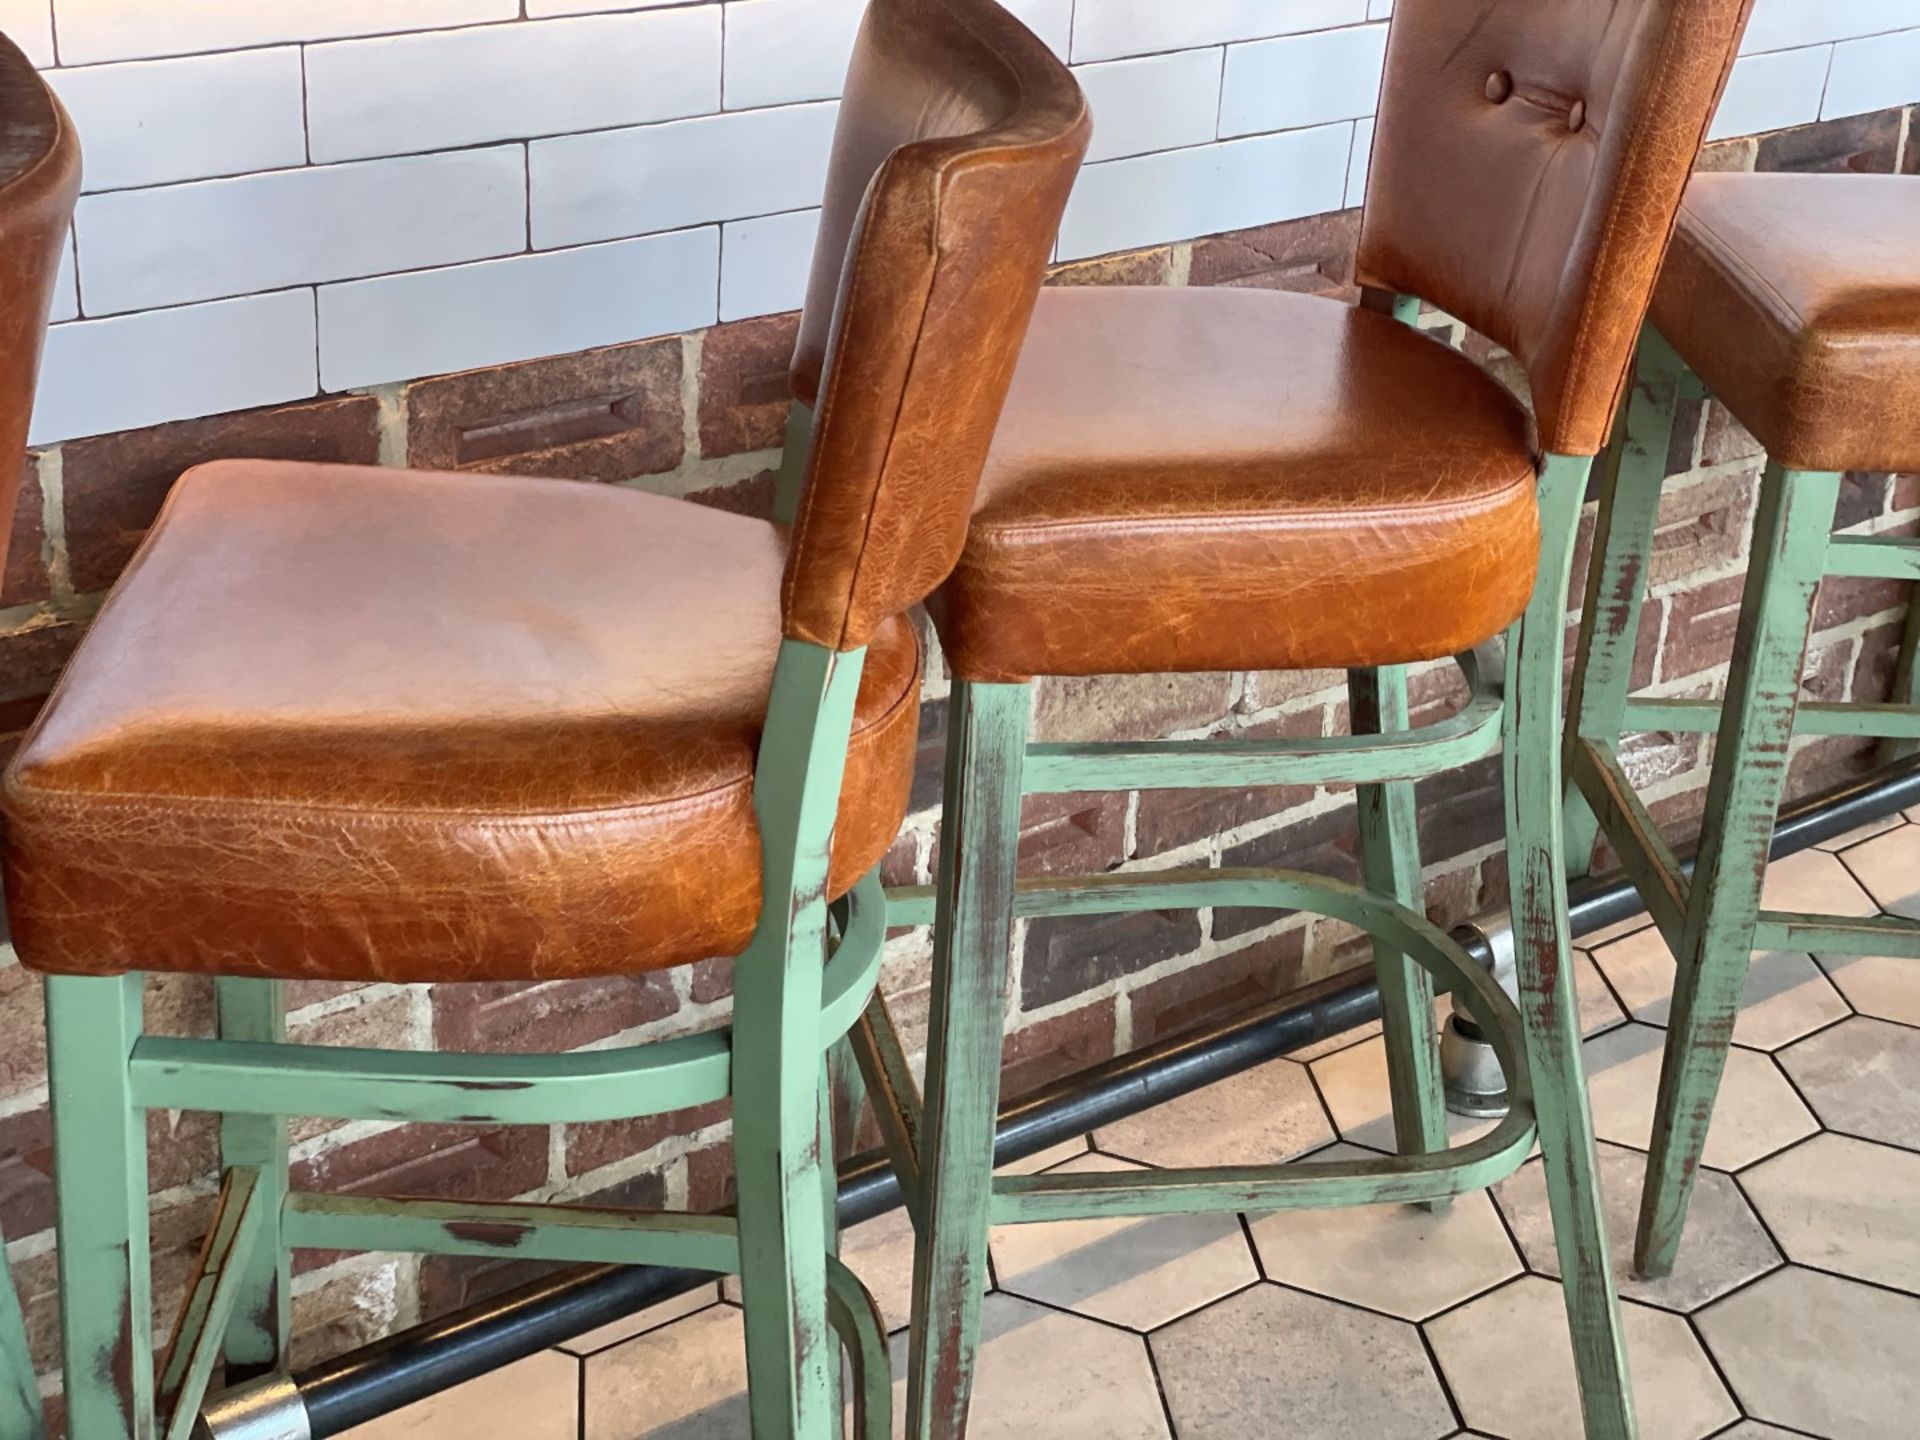 4 x Commercial Restaurant Bar Stools Featuring Wooden Frames With a Distressed Finish and Tan - Image 11 of 15